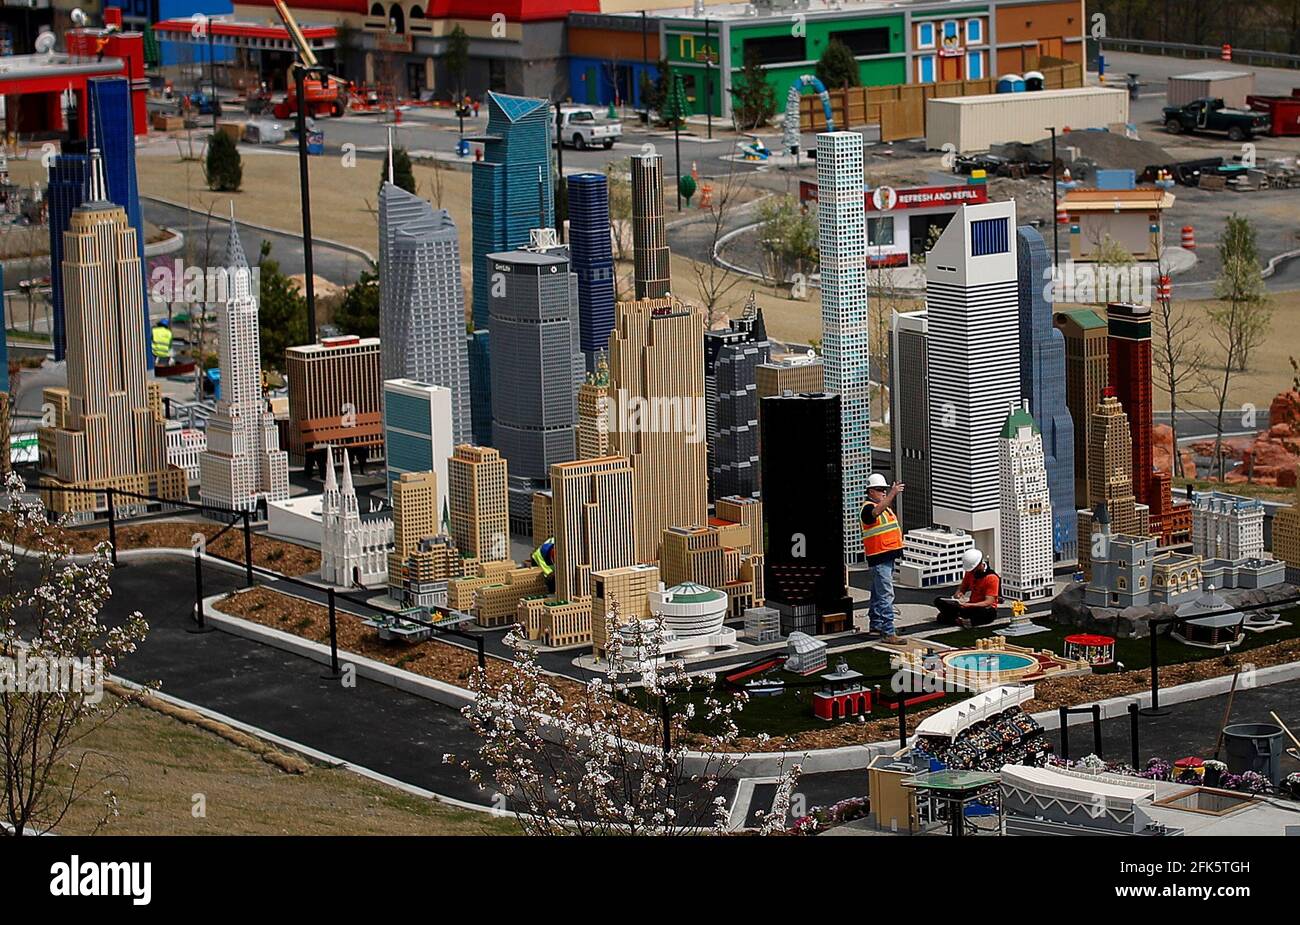 Workers are pictured in the Lego Manhattan section of the New York City  exhibit in the "Miniland" area of the new Legoland New York Resort theme  park during a press preview of